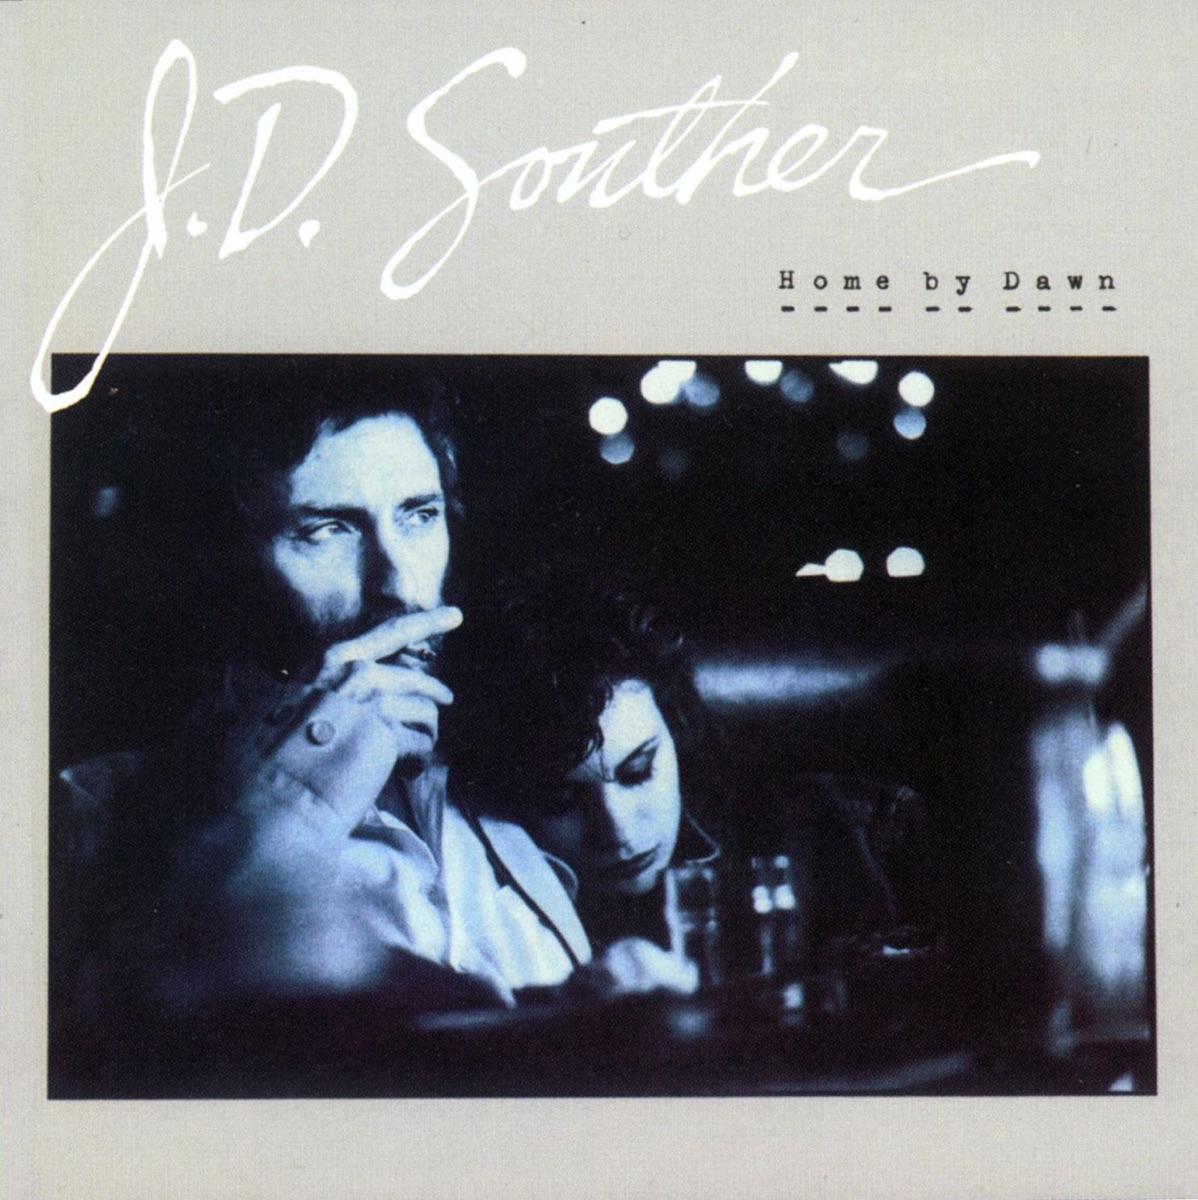 You're Only Lonely - Album by JD Souther - Apple Music